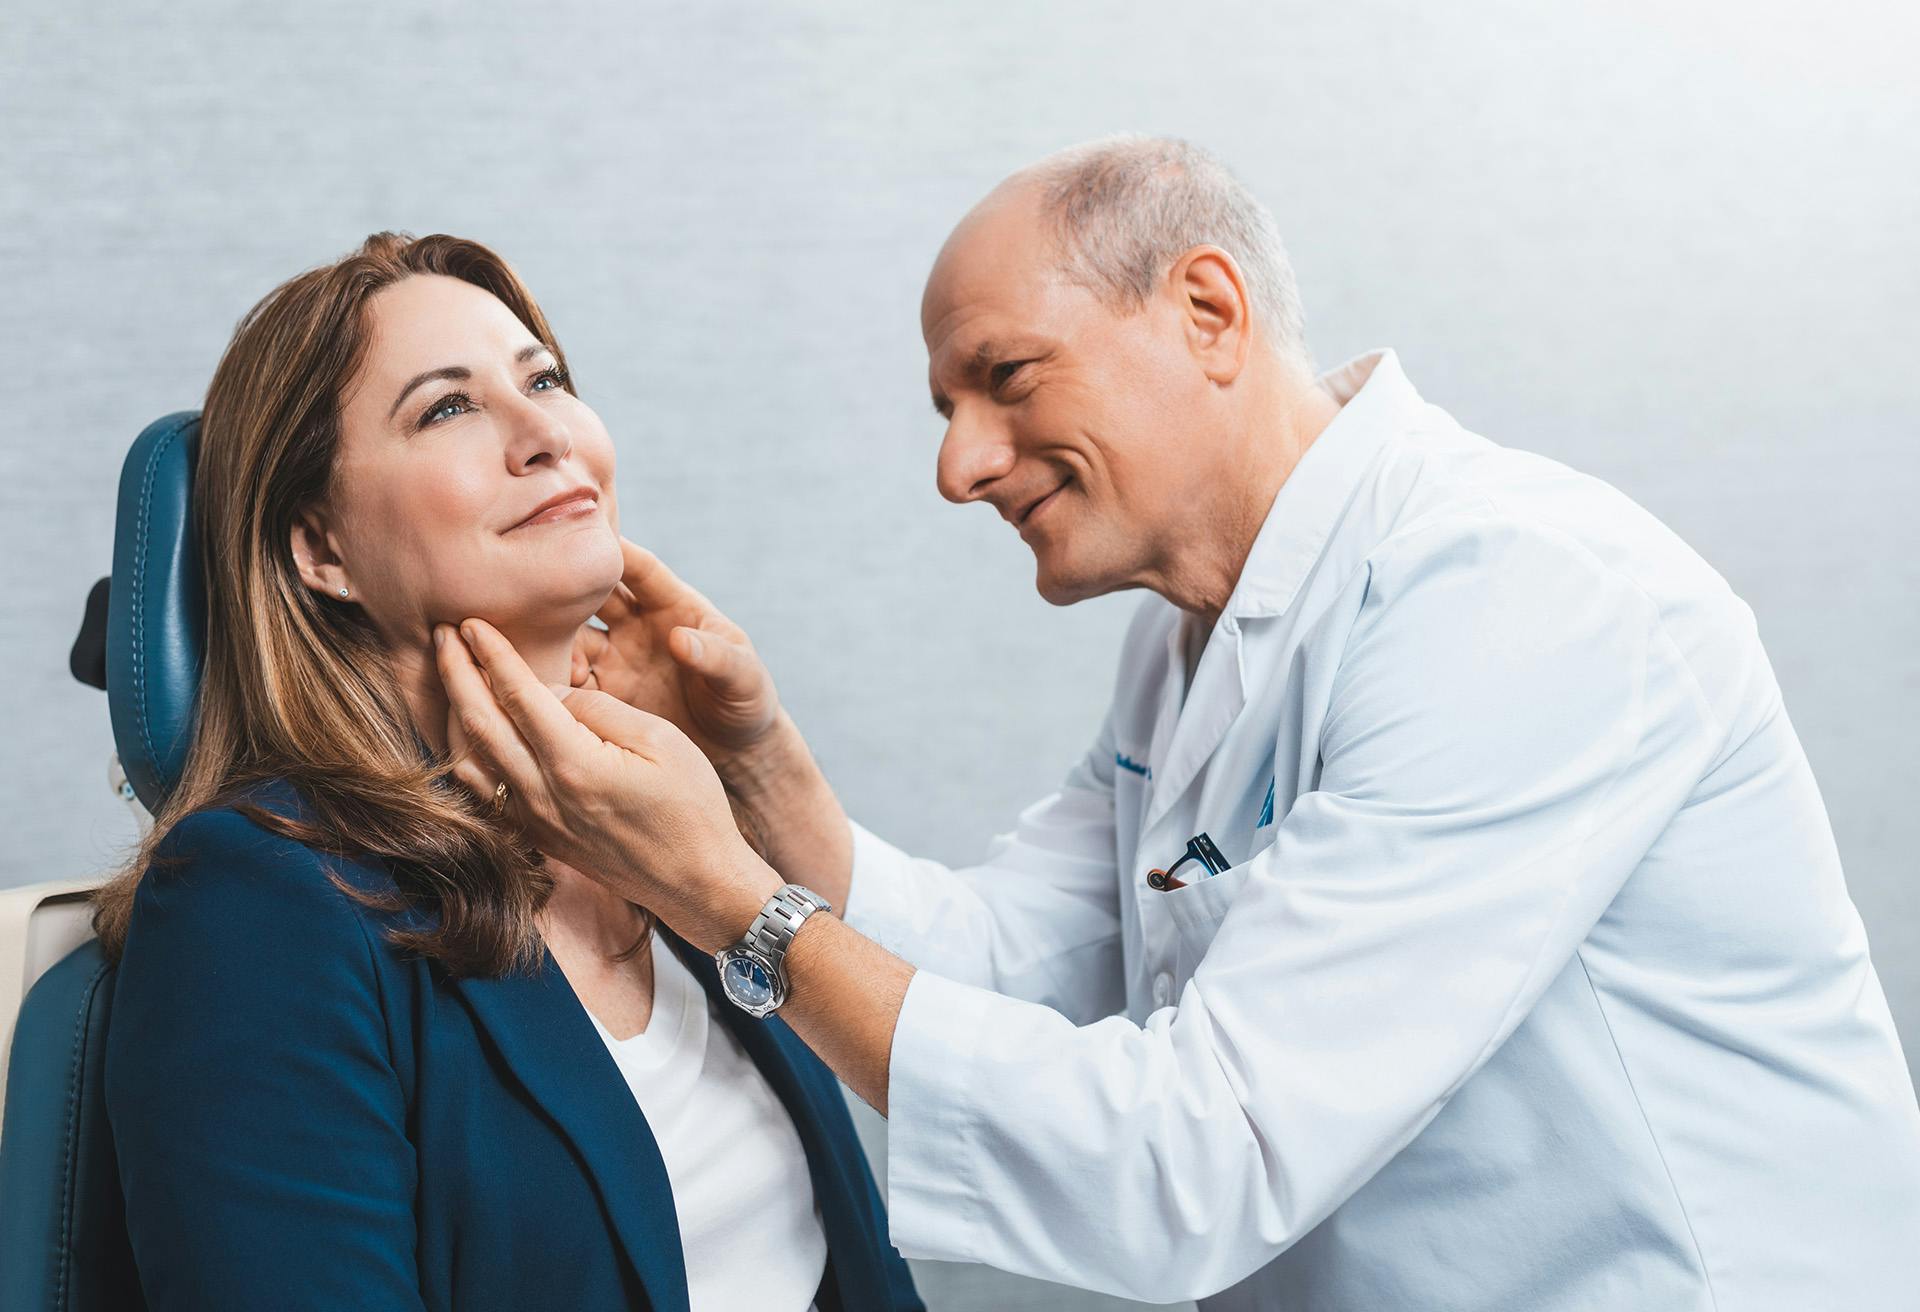 Dr. Zenn looking at a patients face with his hand on her chin